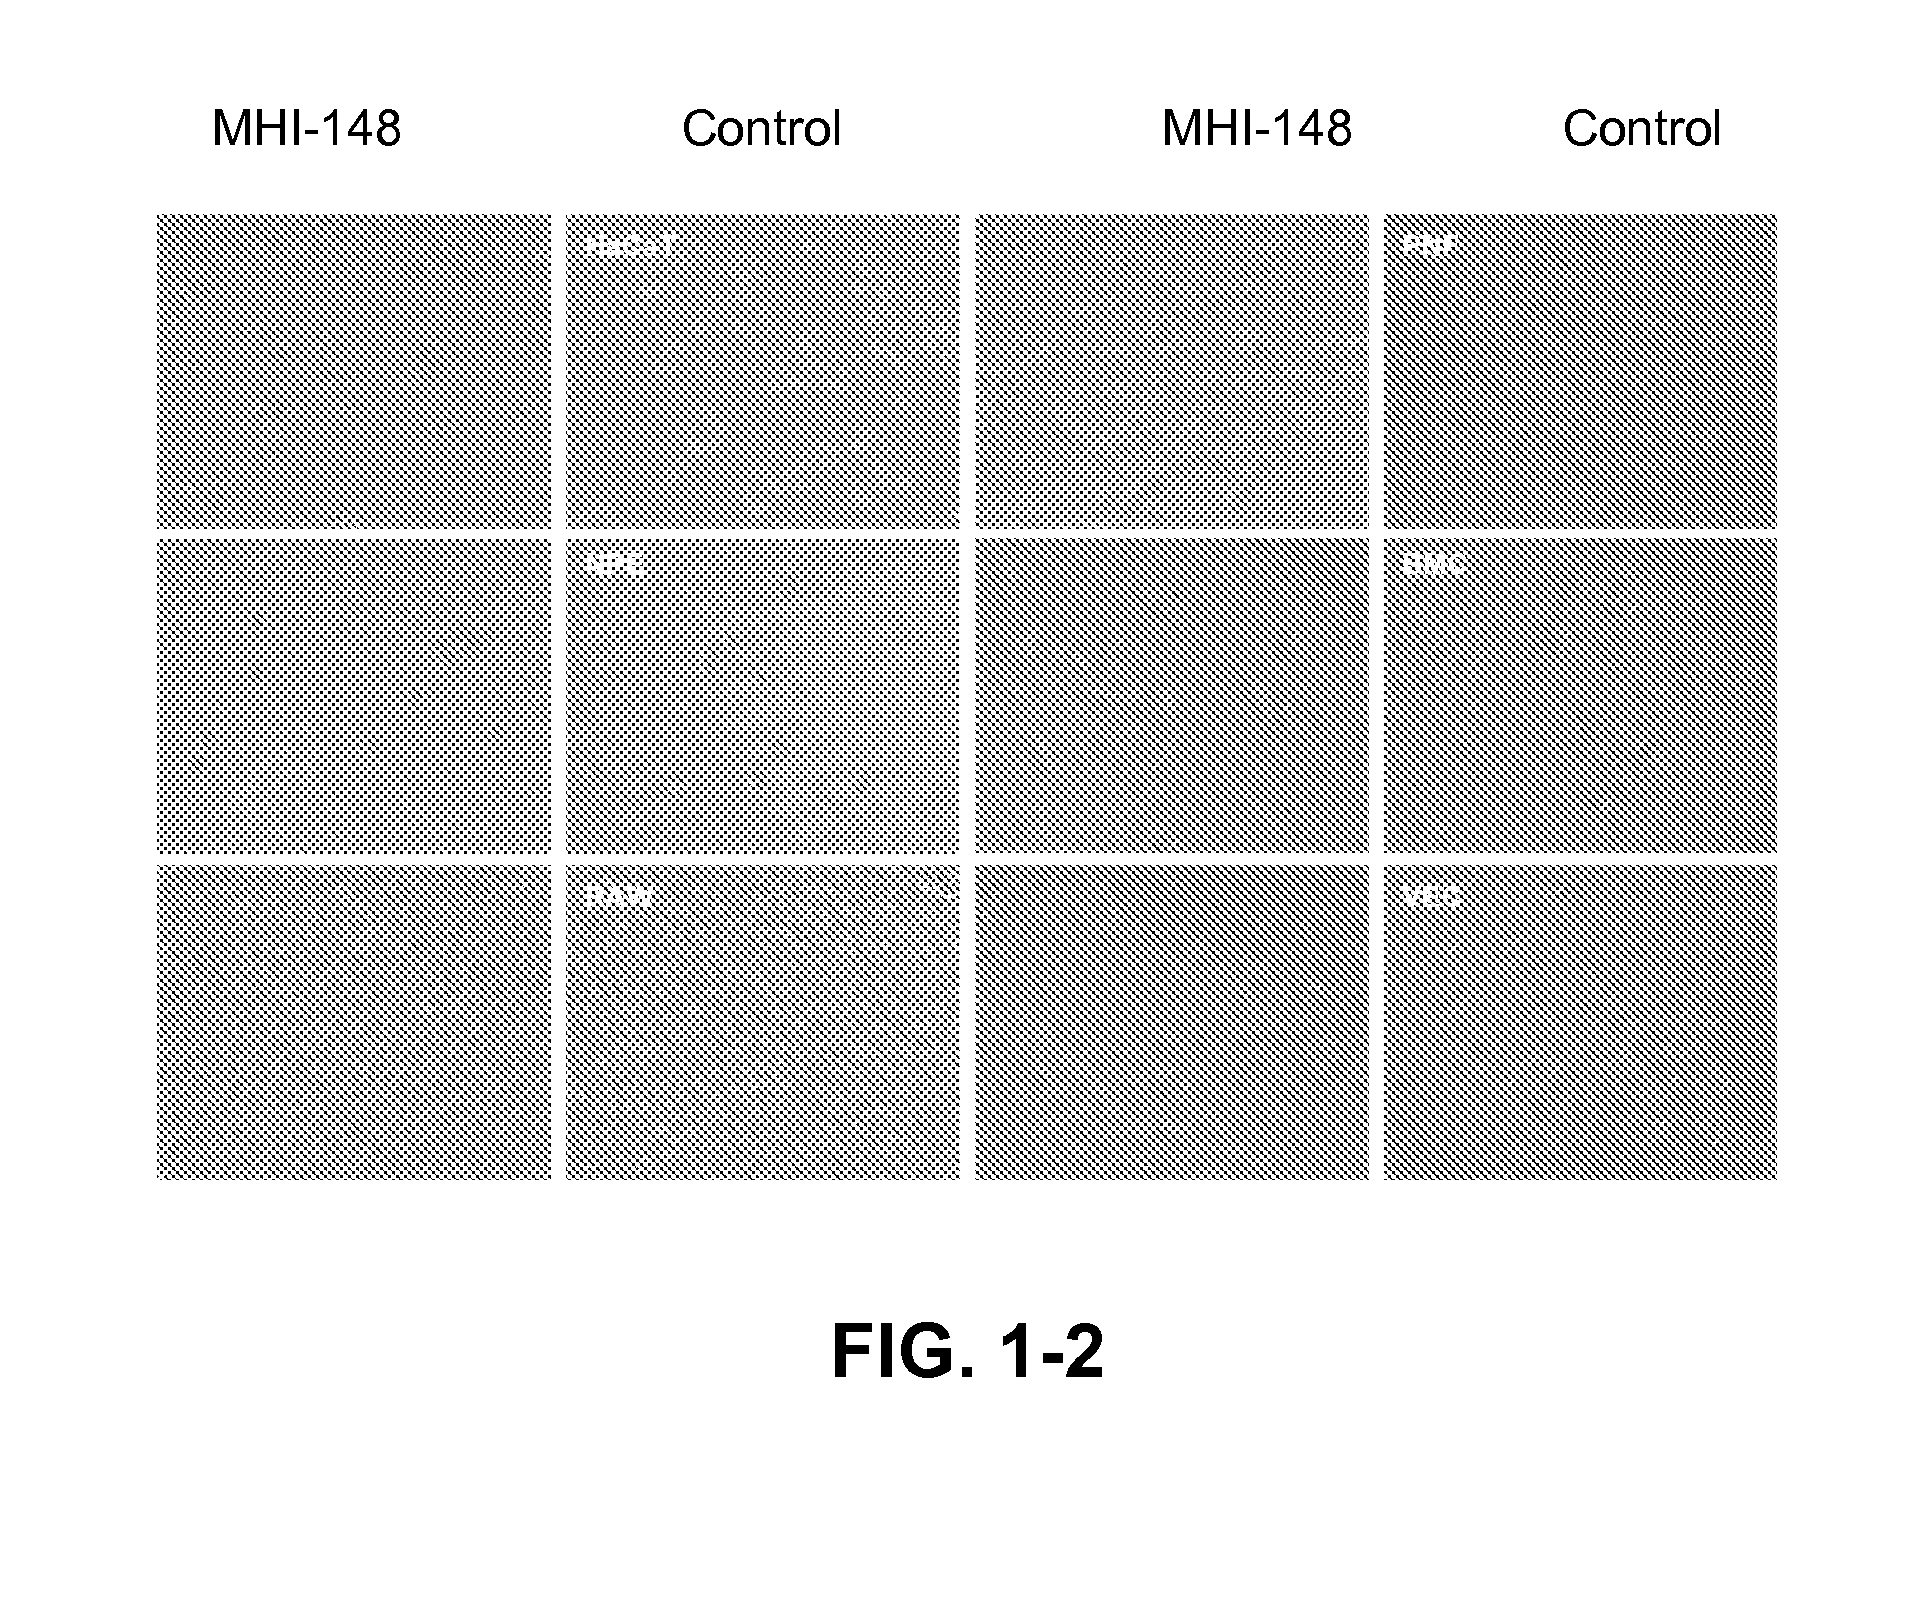 Cyanine-containing compounds for cancer imaging and treatment